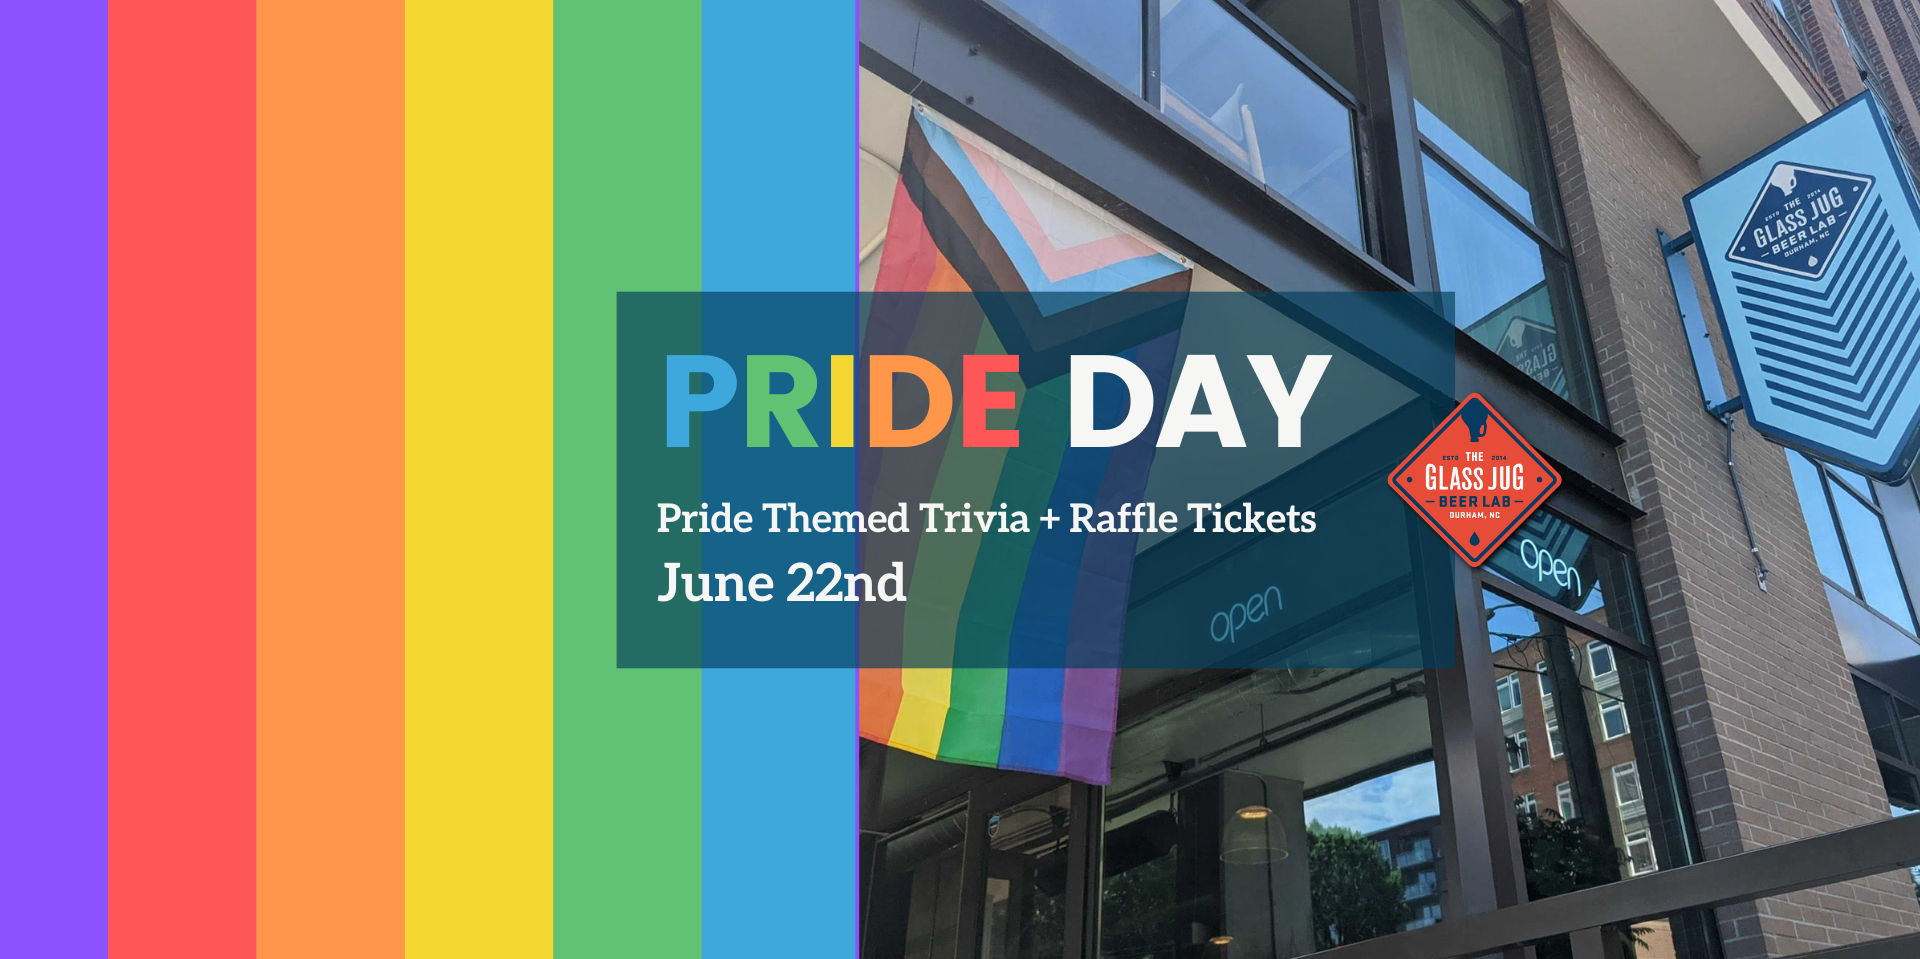 PRIDE DAY + Pride Themed Trivia @ The Glass Jug Downtown promotional image